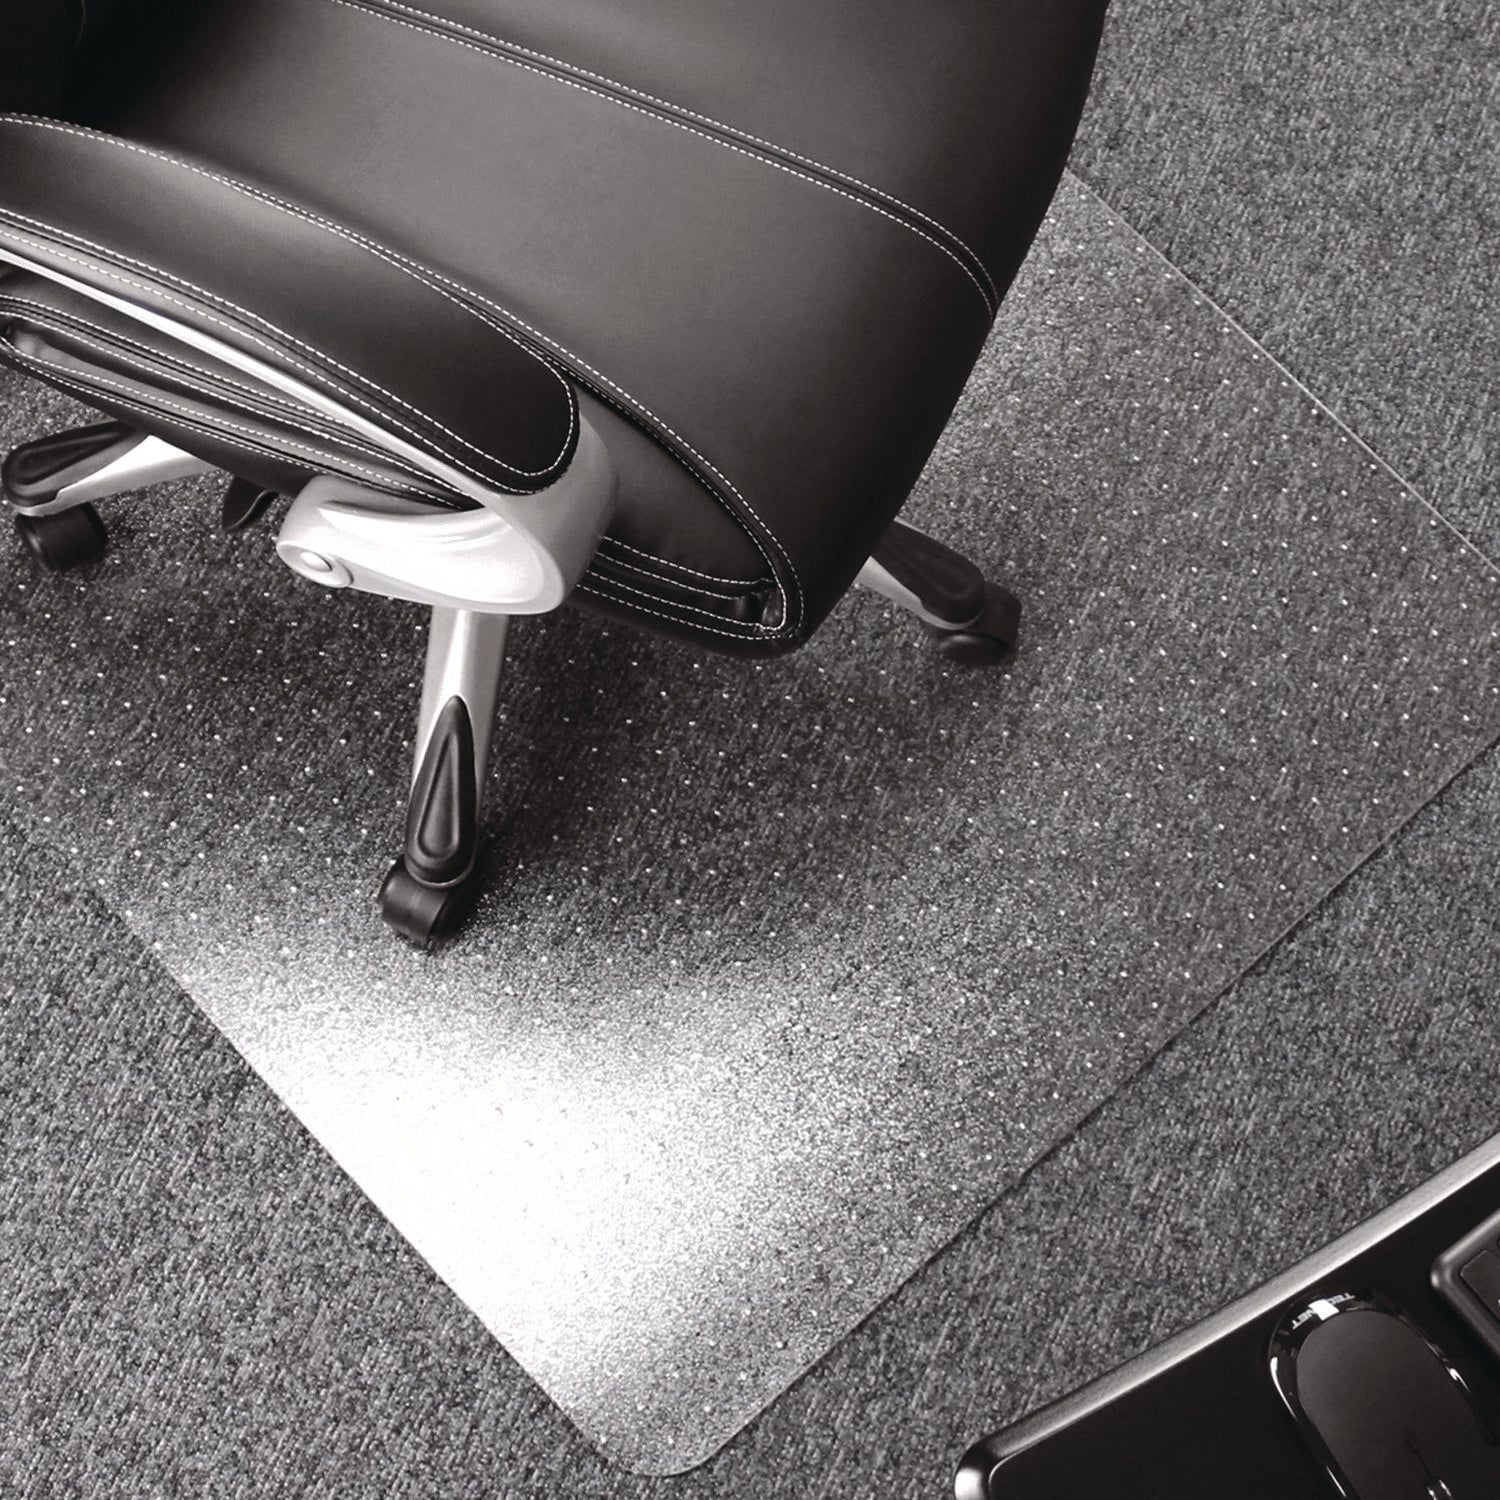 Cleartex Ultimat Chair Mat for High Pile Carpets, 60 x 48, Clear - 1